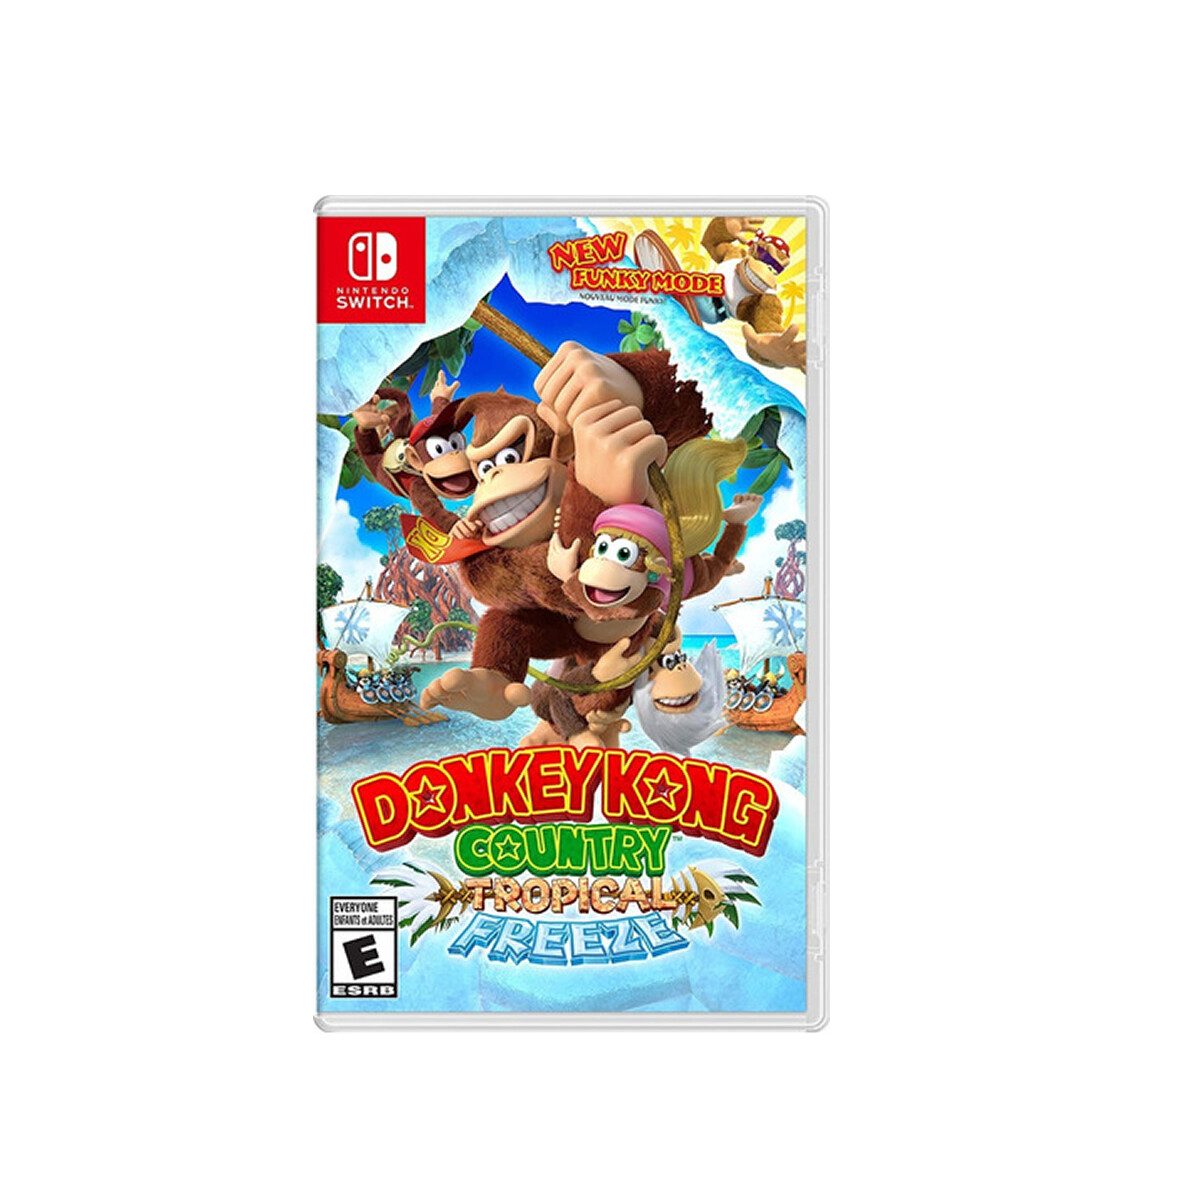 NSW Donkey Kong Country: Tropical Freeze 